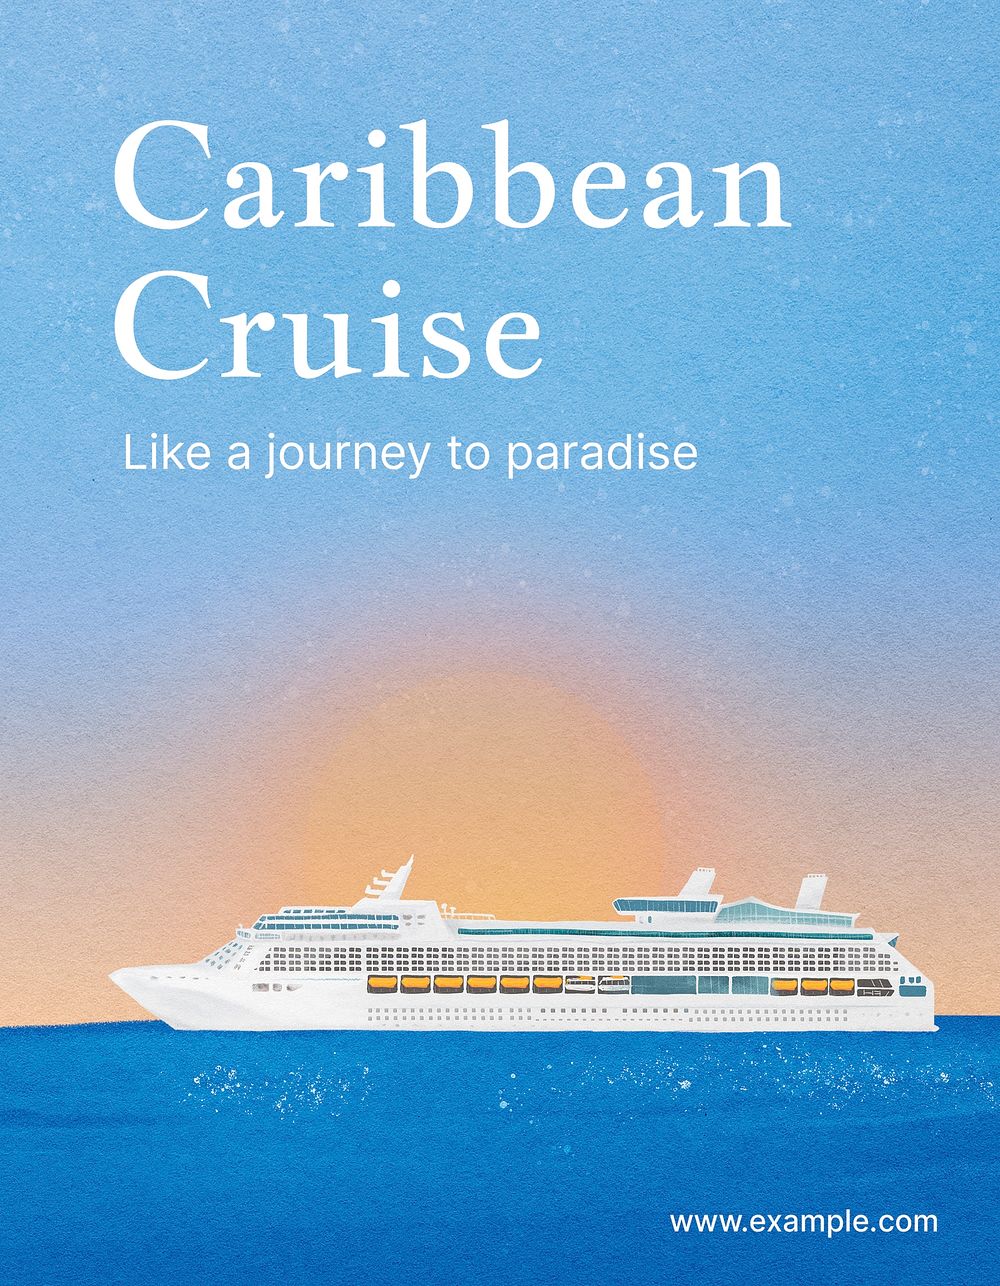 Caribbean cruise flyer template, tourism industry psd